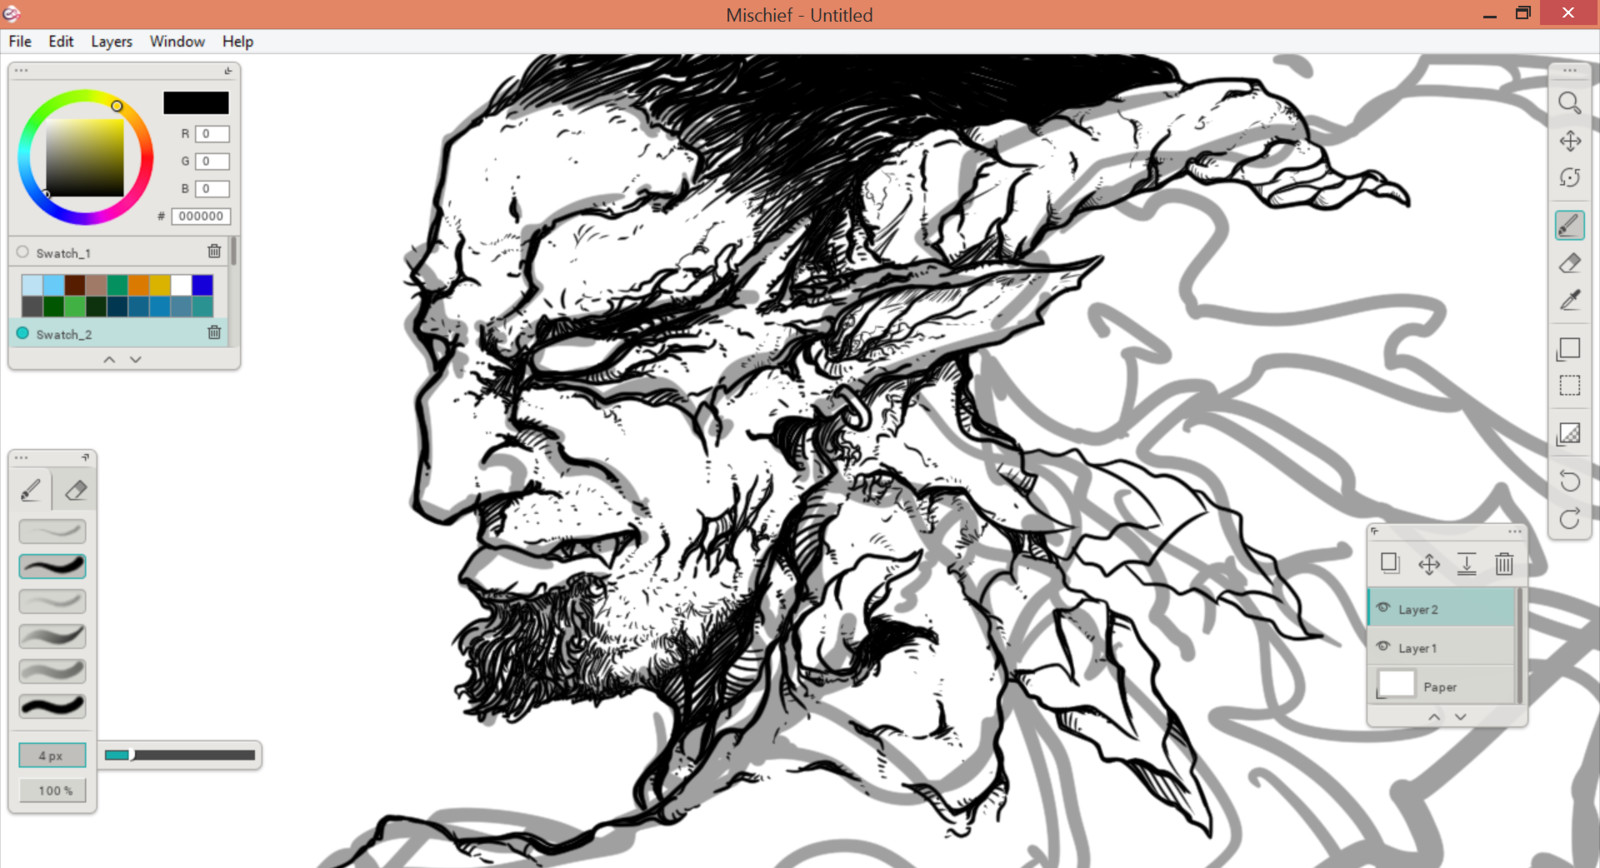 03 - Inking the face in more details